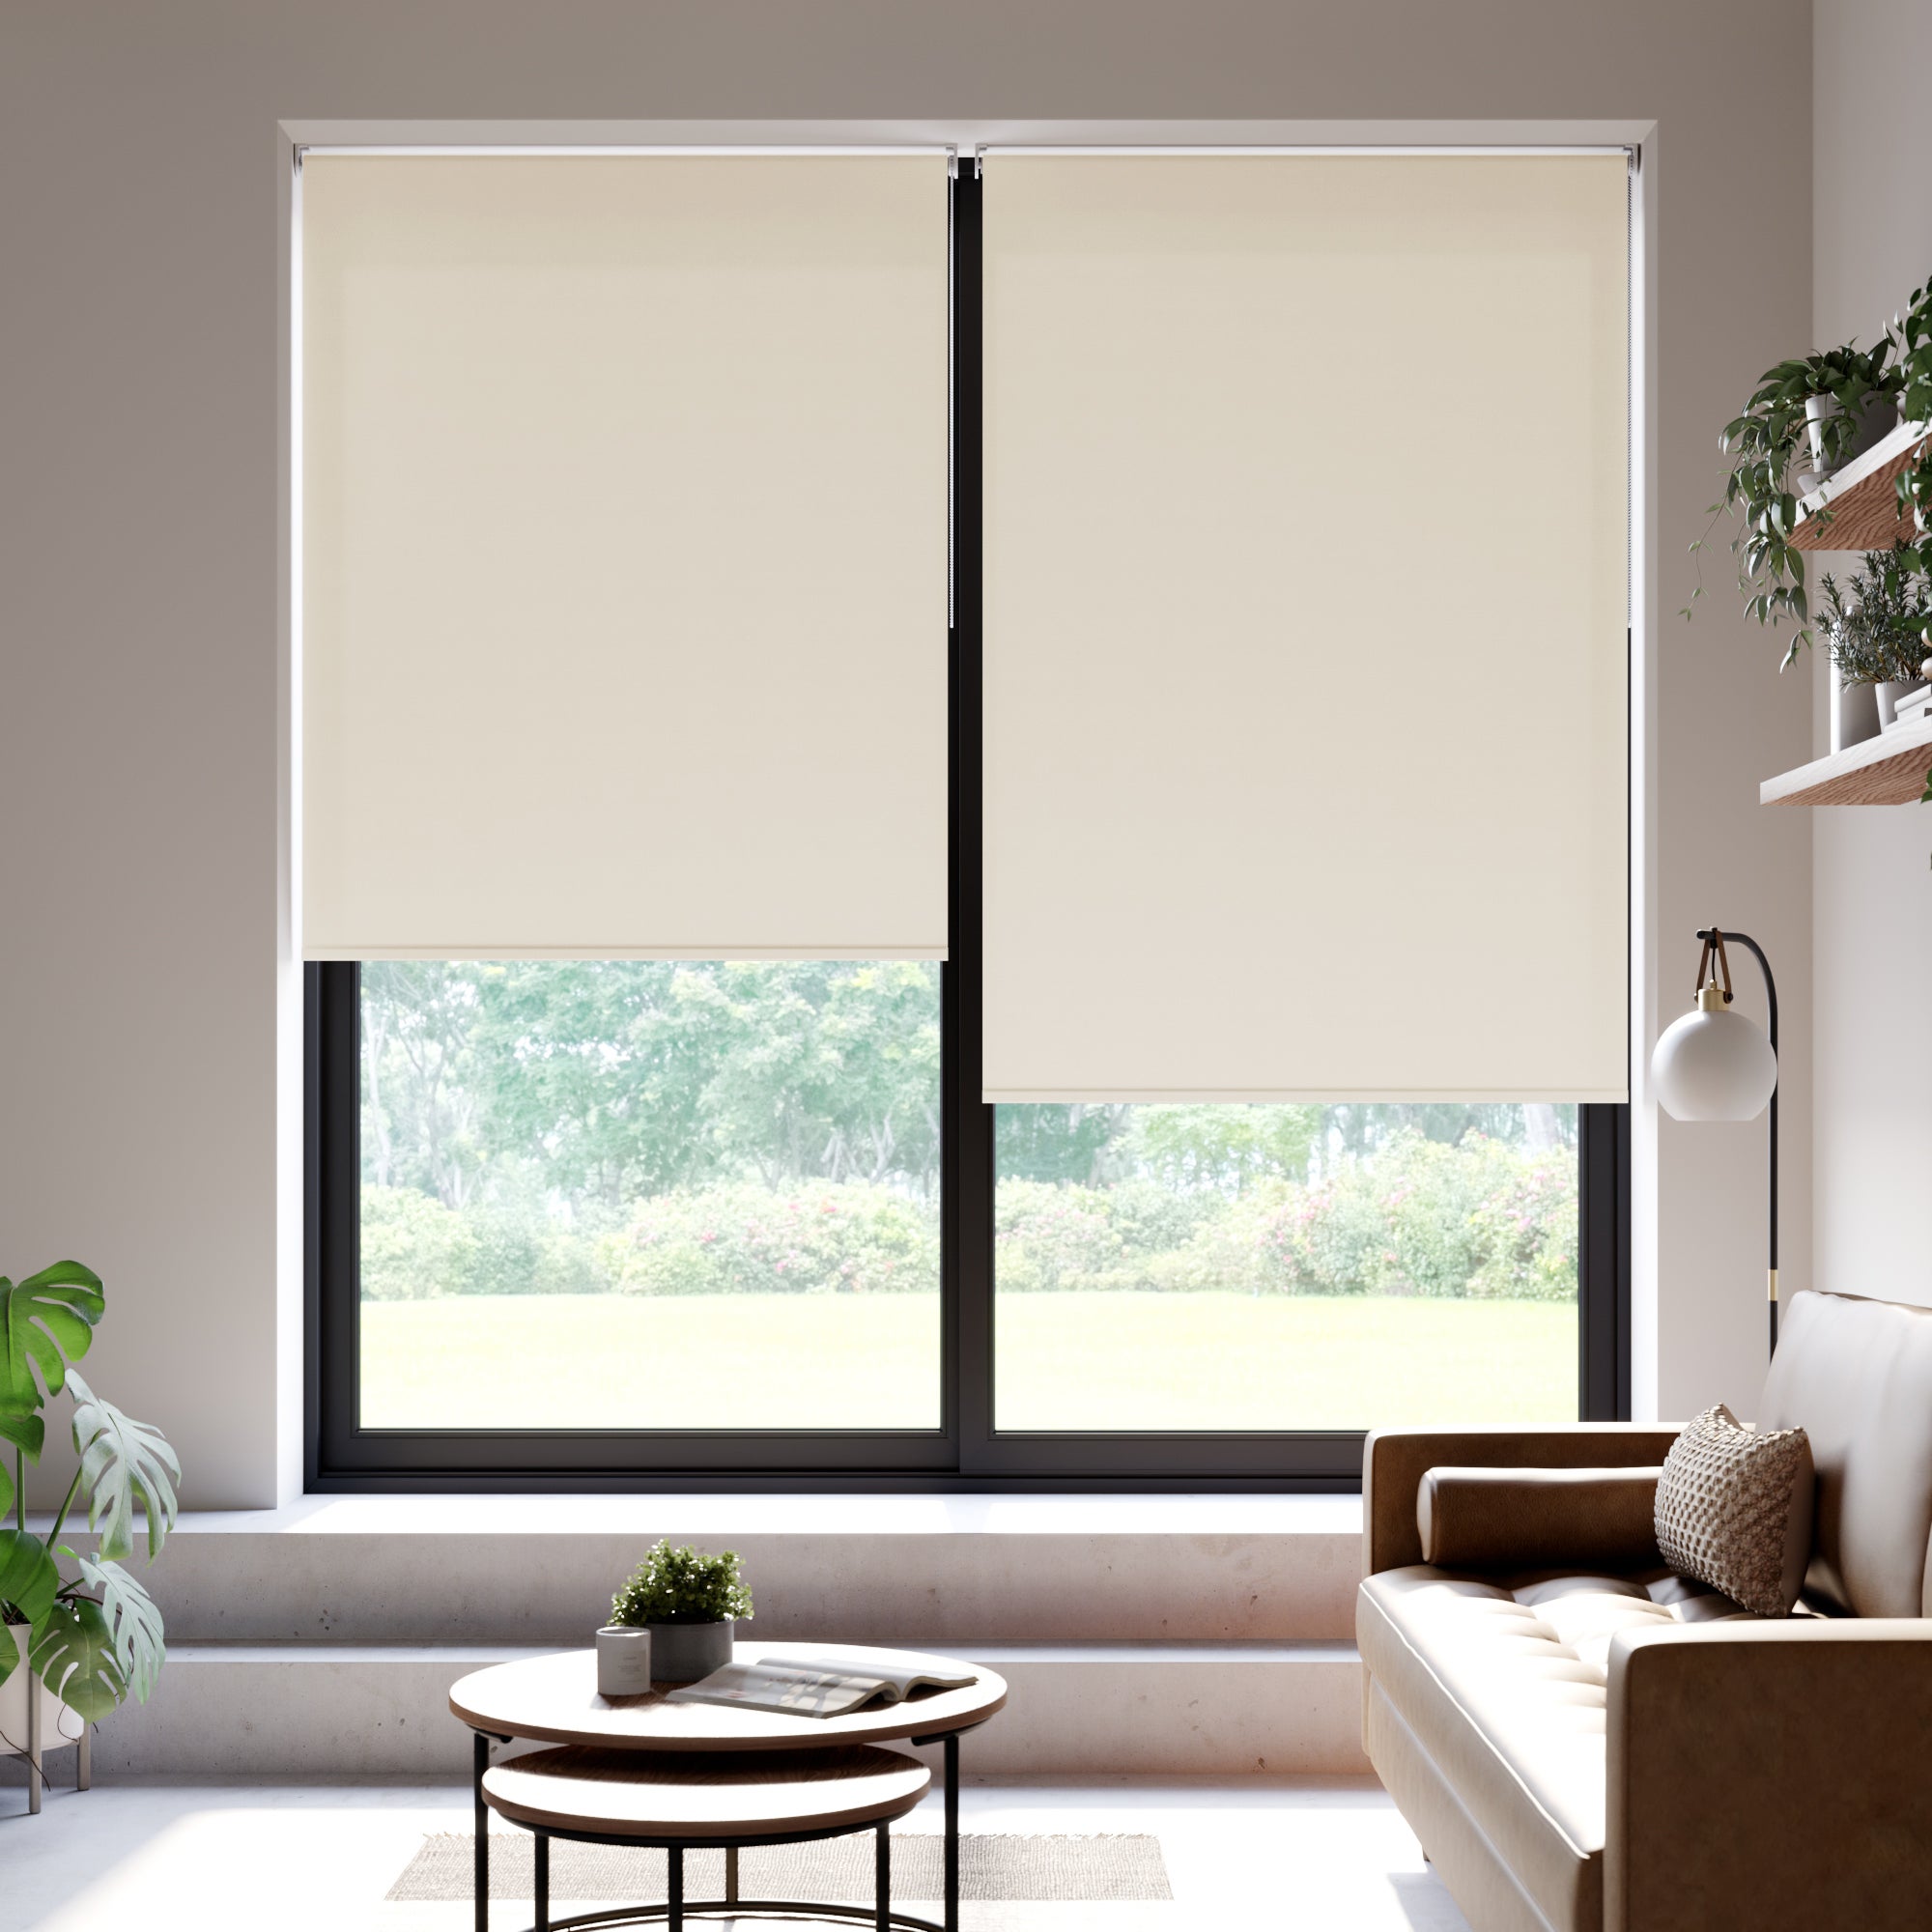 Iona Daylight Made to Measure Flame Retardant Roller Blind Fabric Sample Iona Sandstone